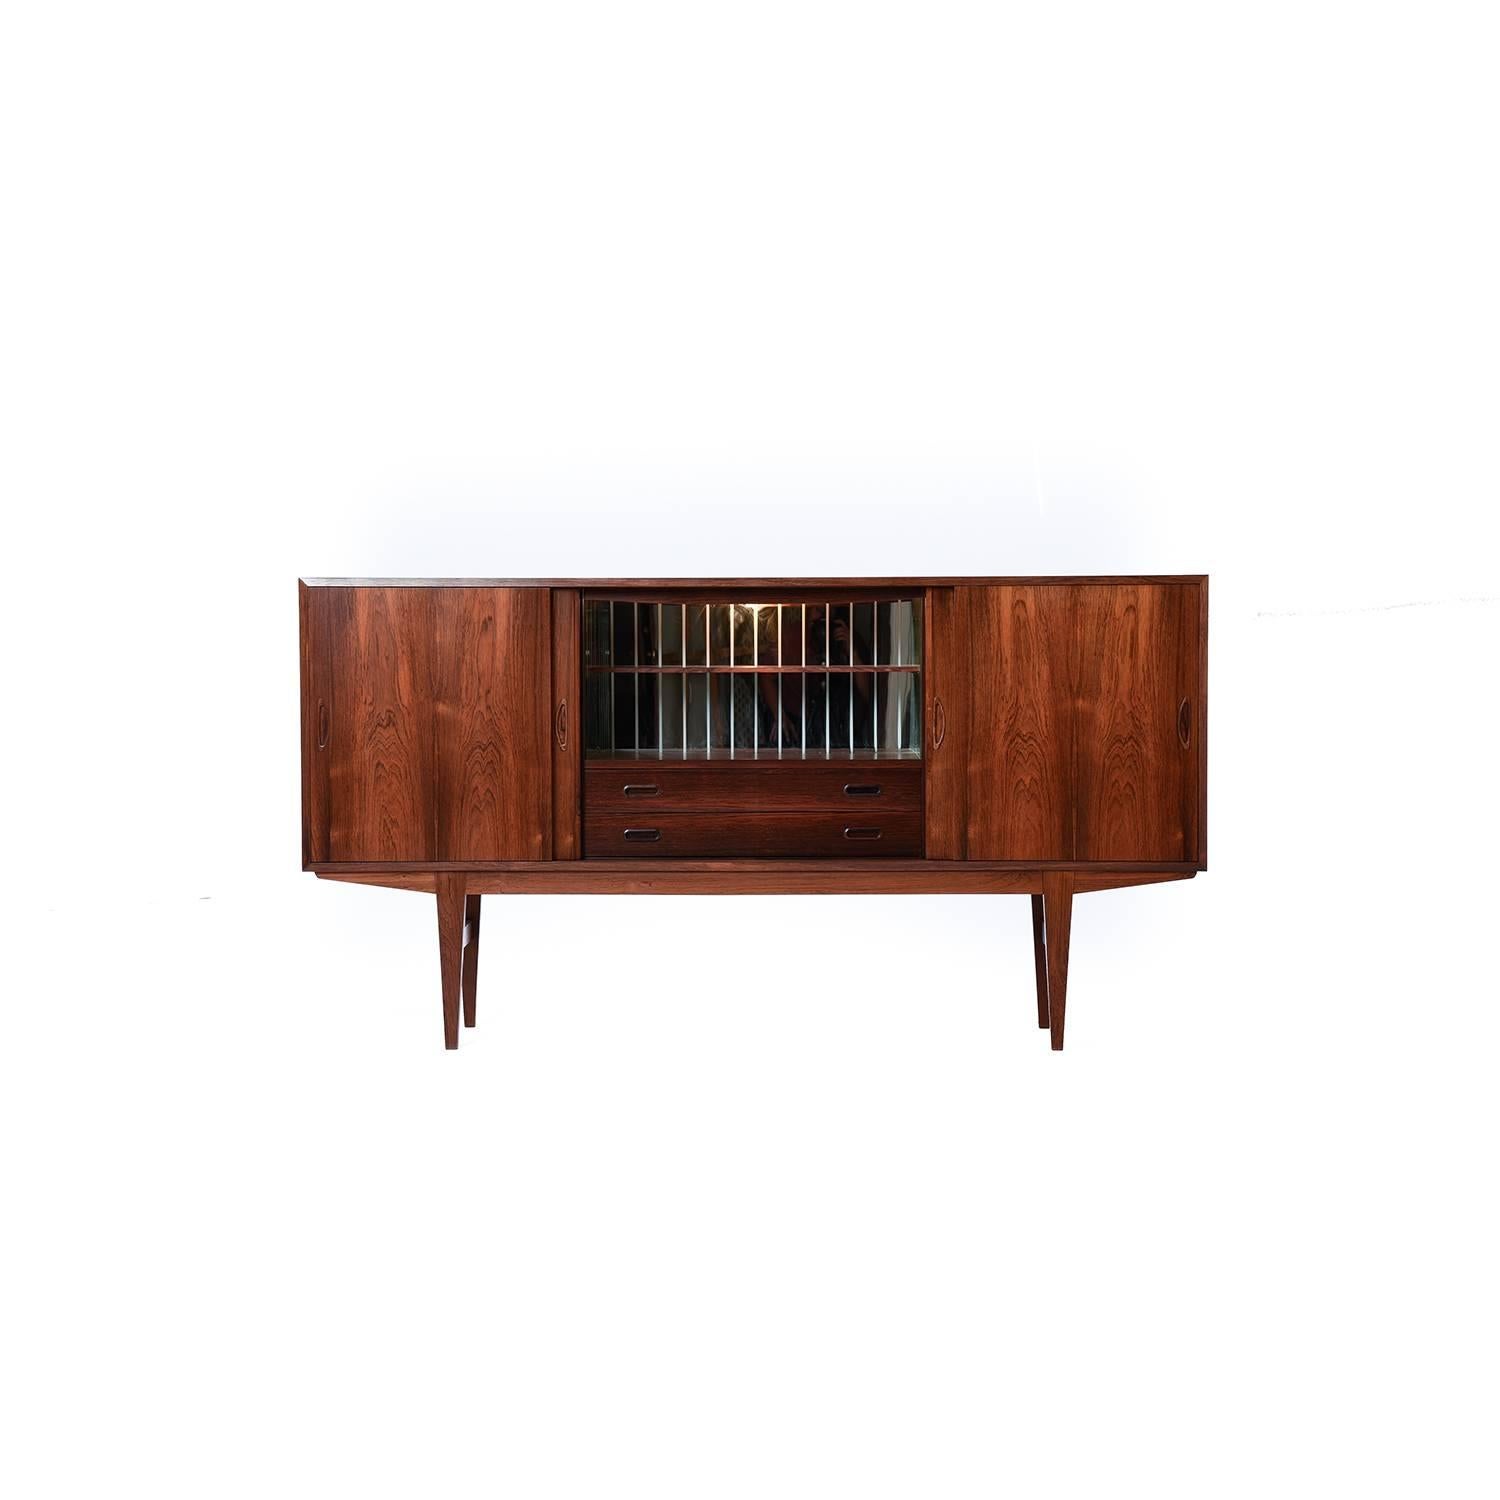 This stately rosewood credenza makes a statement open or closed. The center of the piece contains a self lighting bar with a pair of felt lined drawers. The side cabinets include generous storage with adjustable shelving.